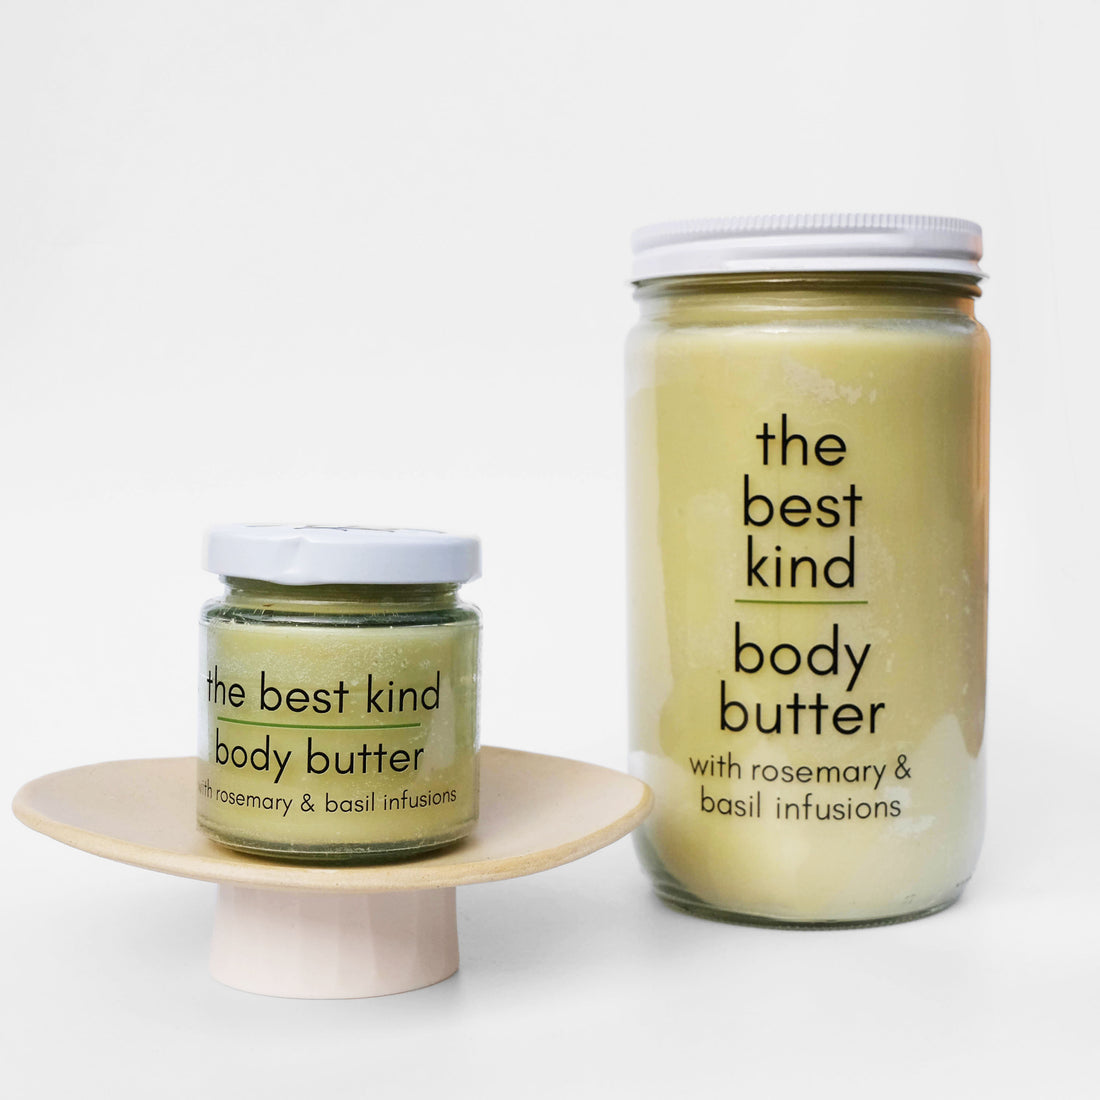 The Best Kind body butters